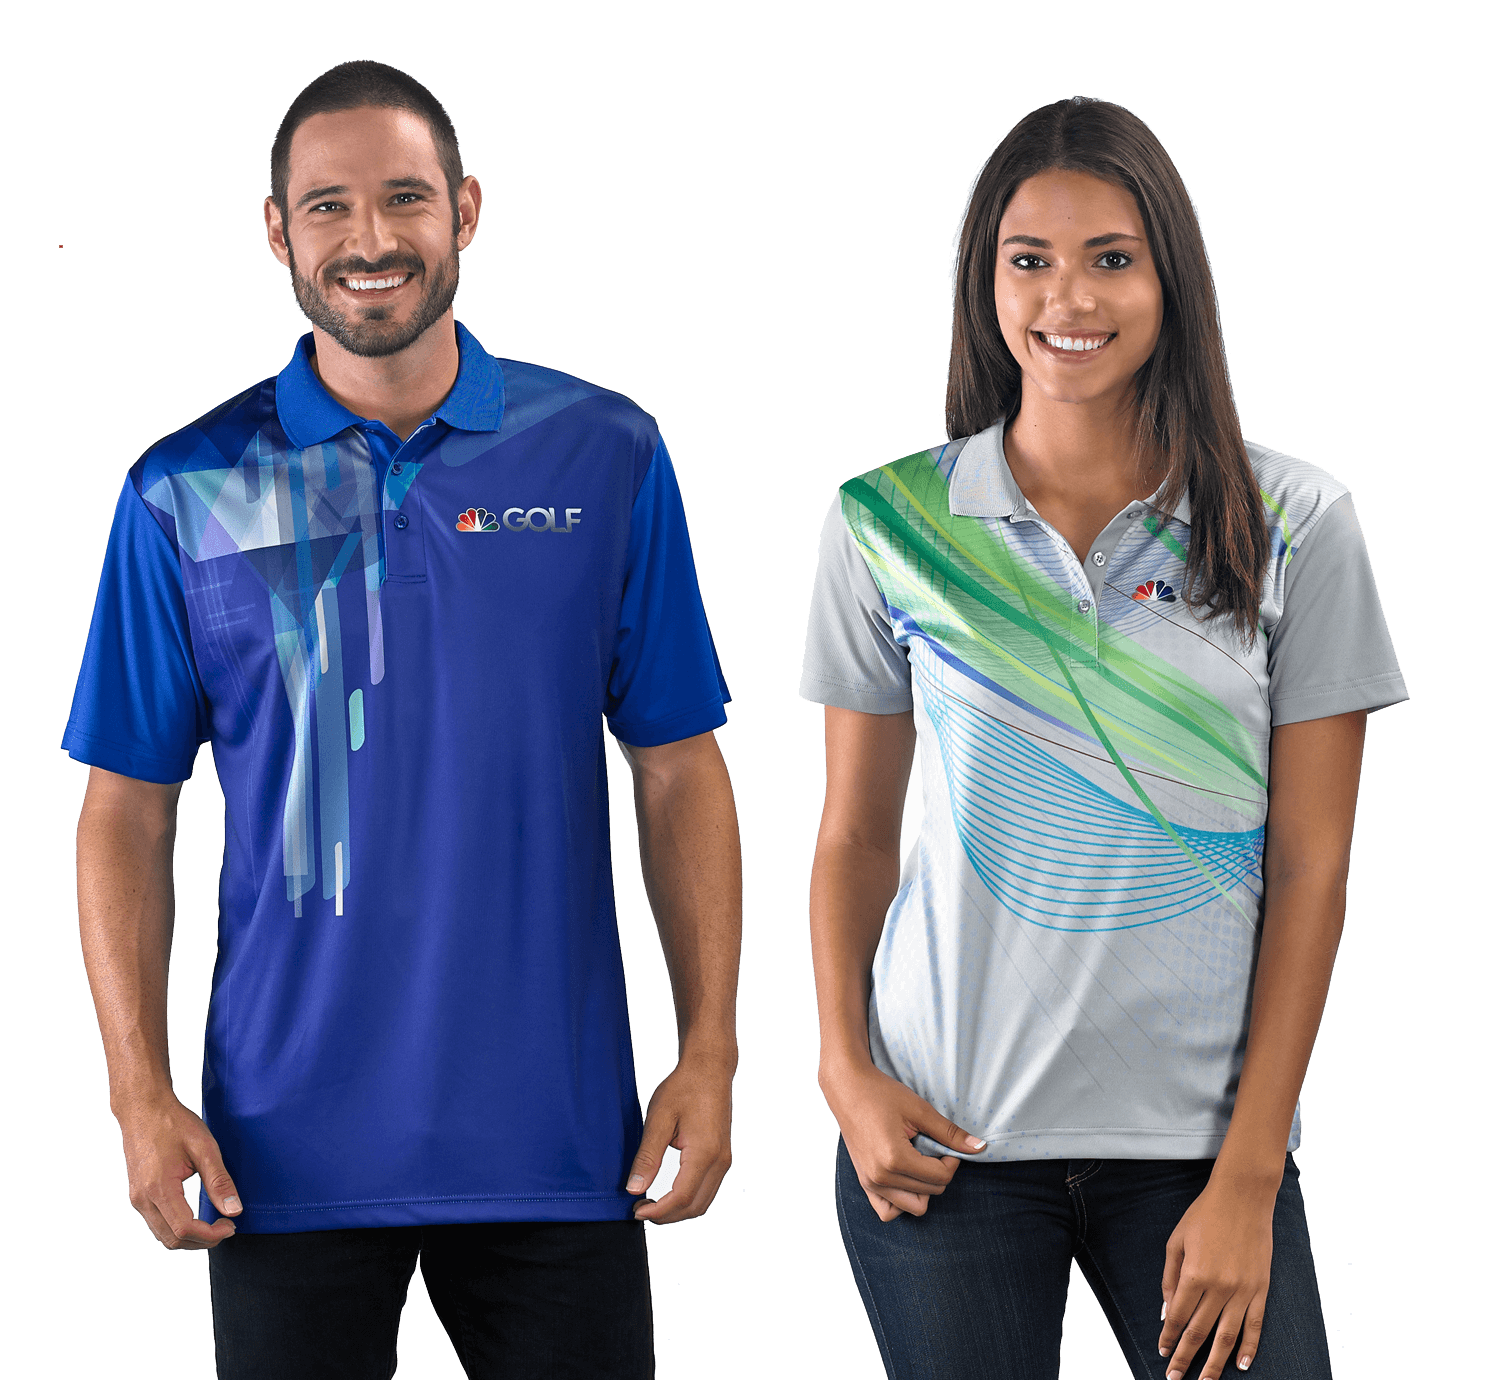 Sublimation Printed Clothing Taylor Made Designs